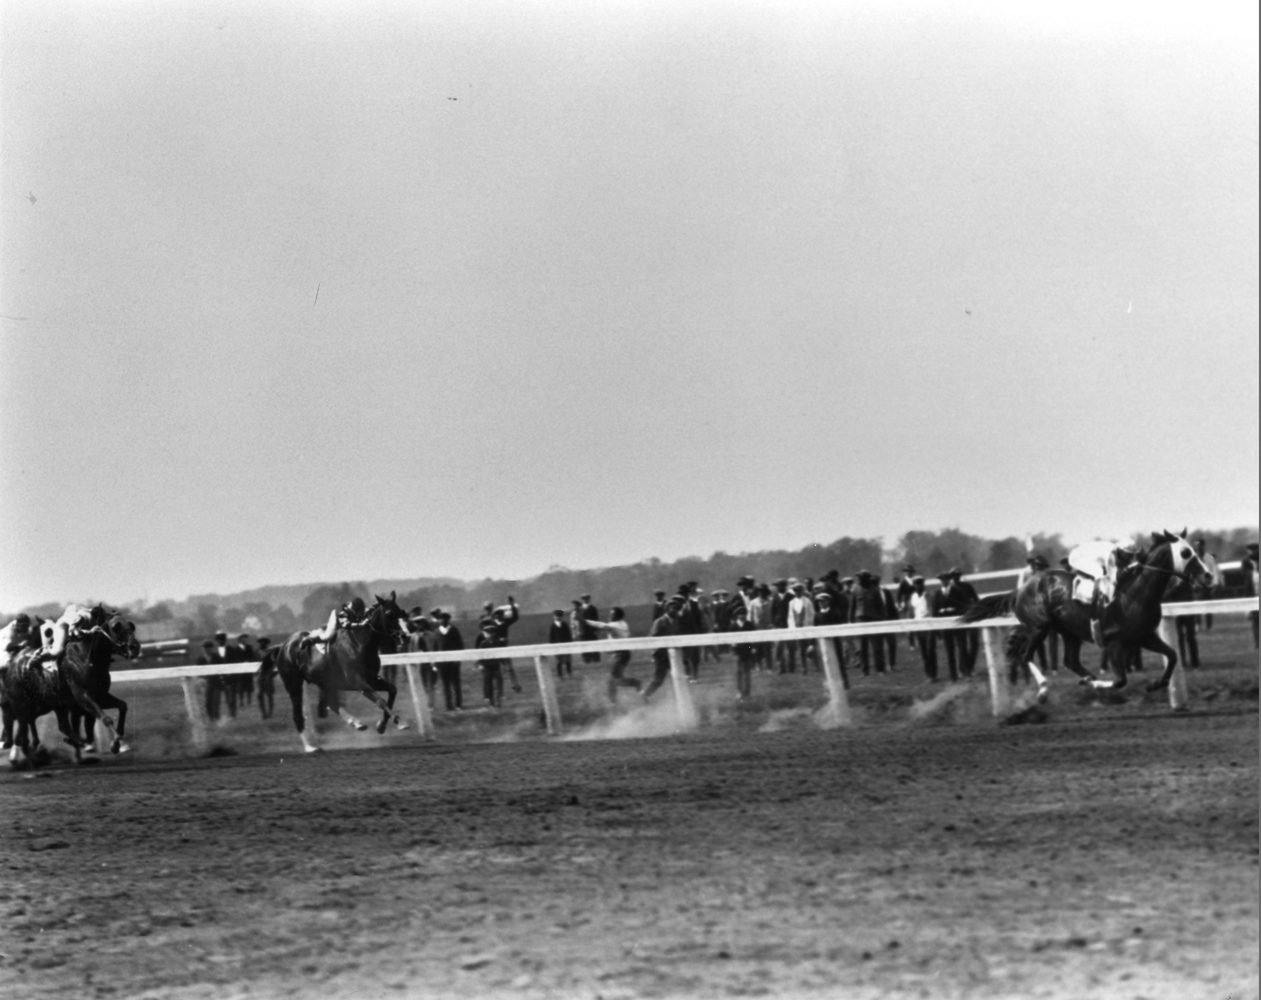 Grey Lag (Earl Sande up) winning the 1923 Metropolitan Handicap at Belmont Park (Keeneland Library Cook Collection/Museum Collection)